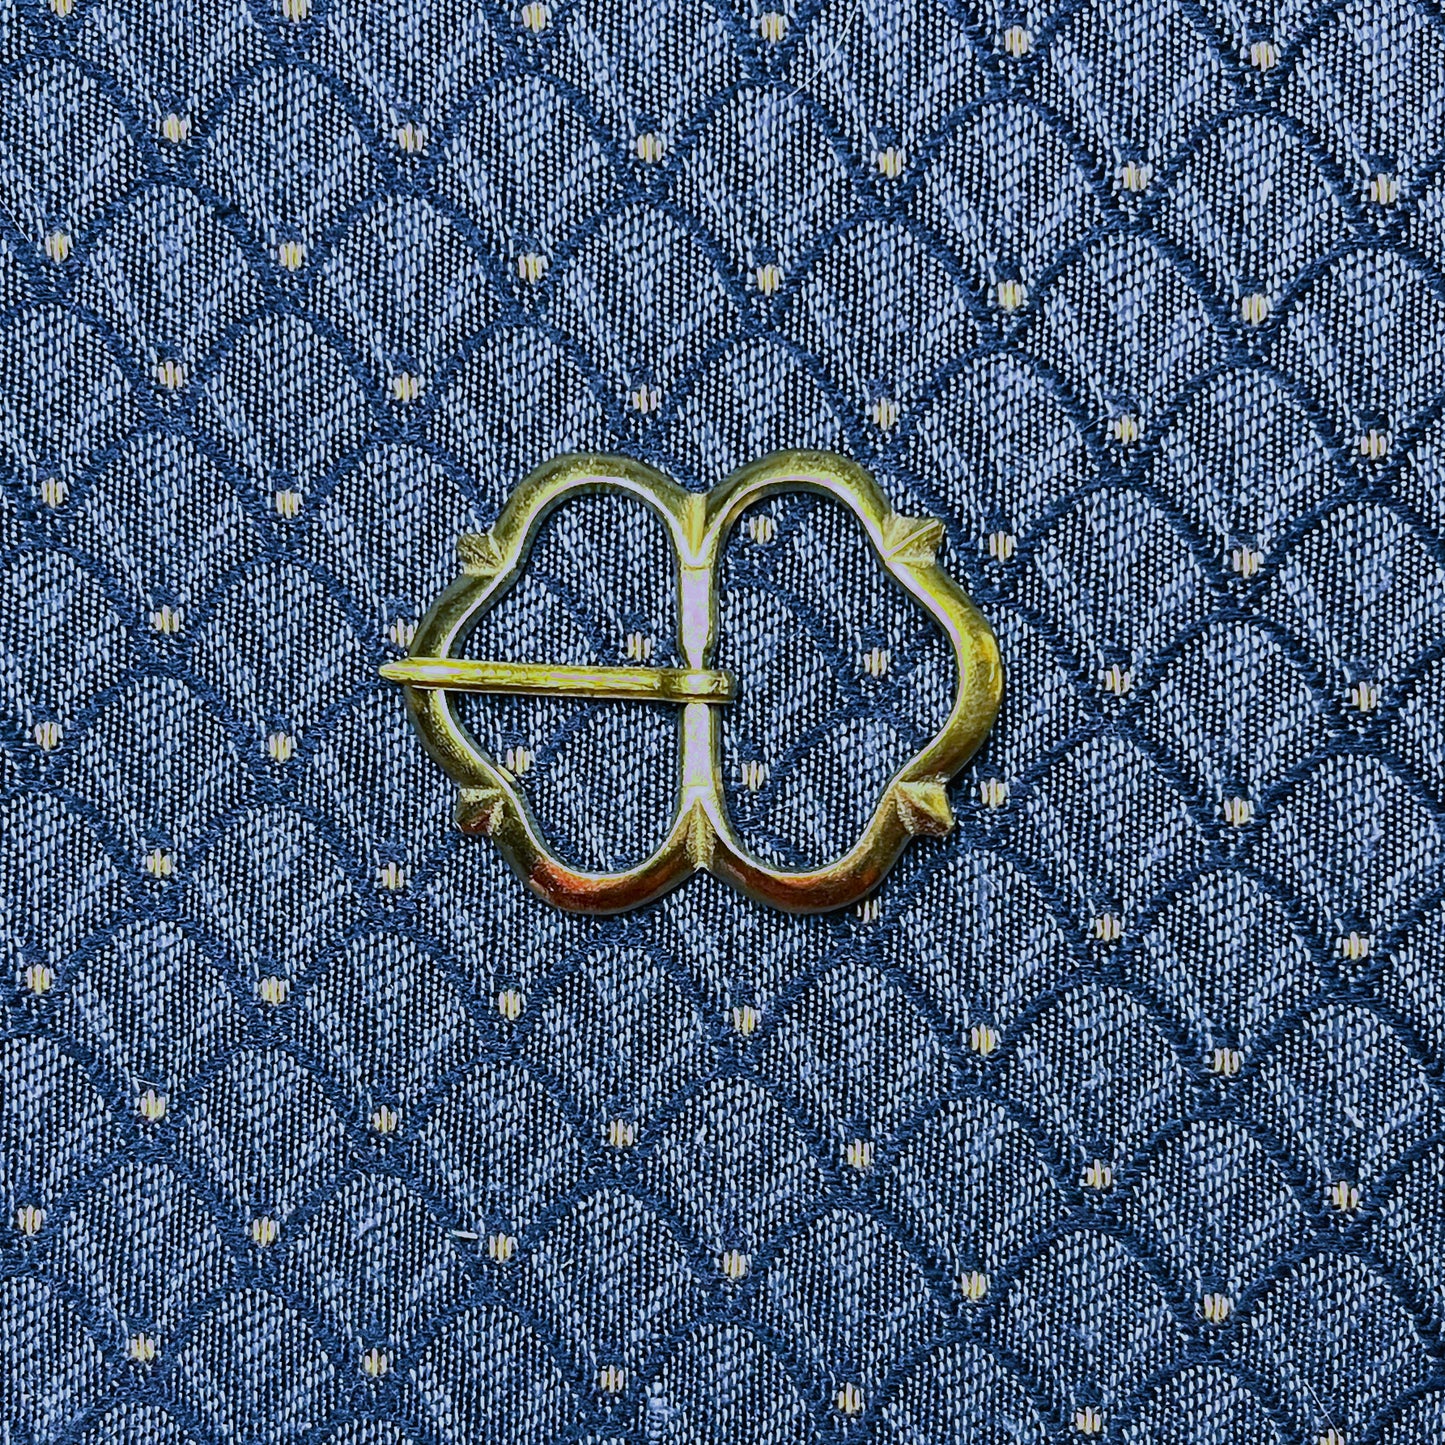 Medieval Spectacle Buckle - Wide Trefoil D-shaped Buckle